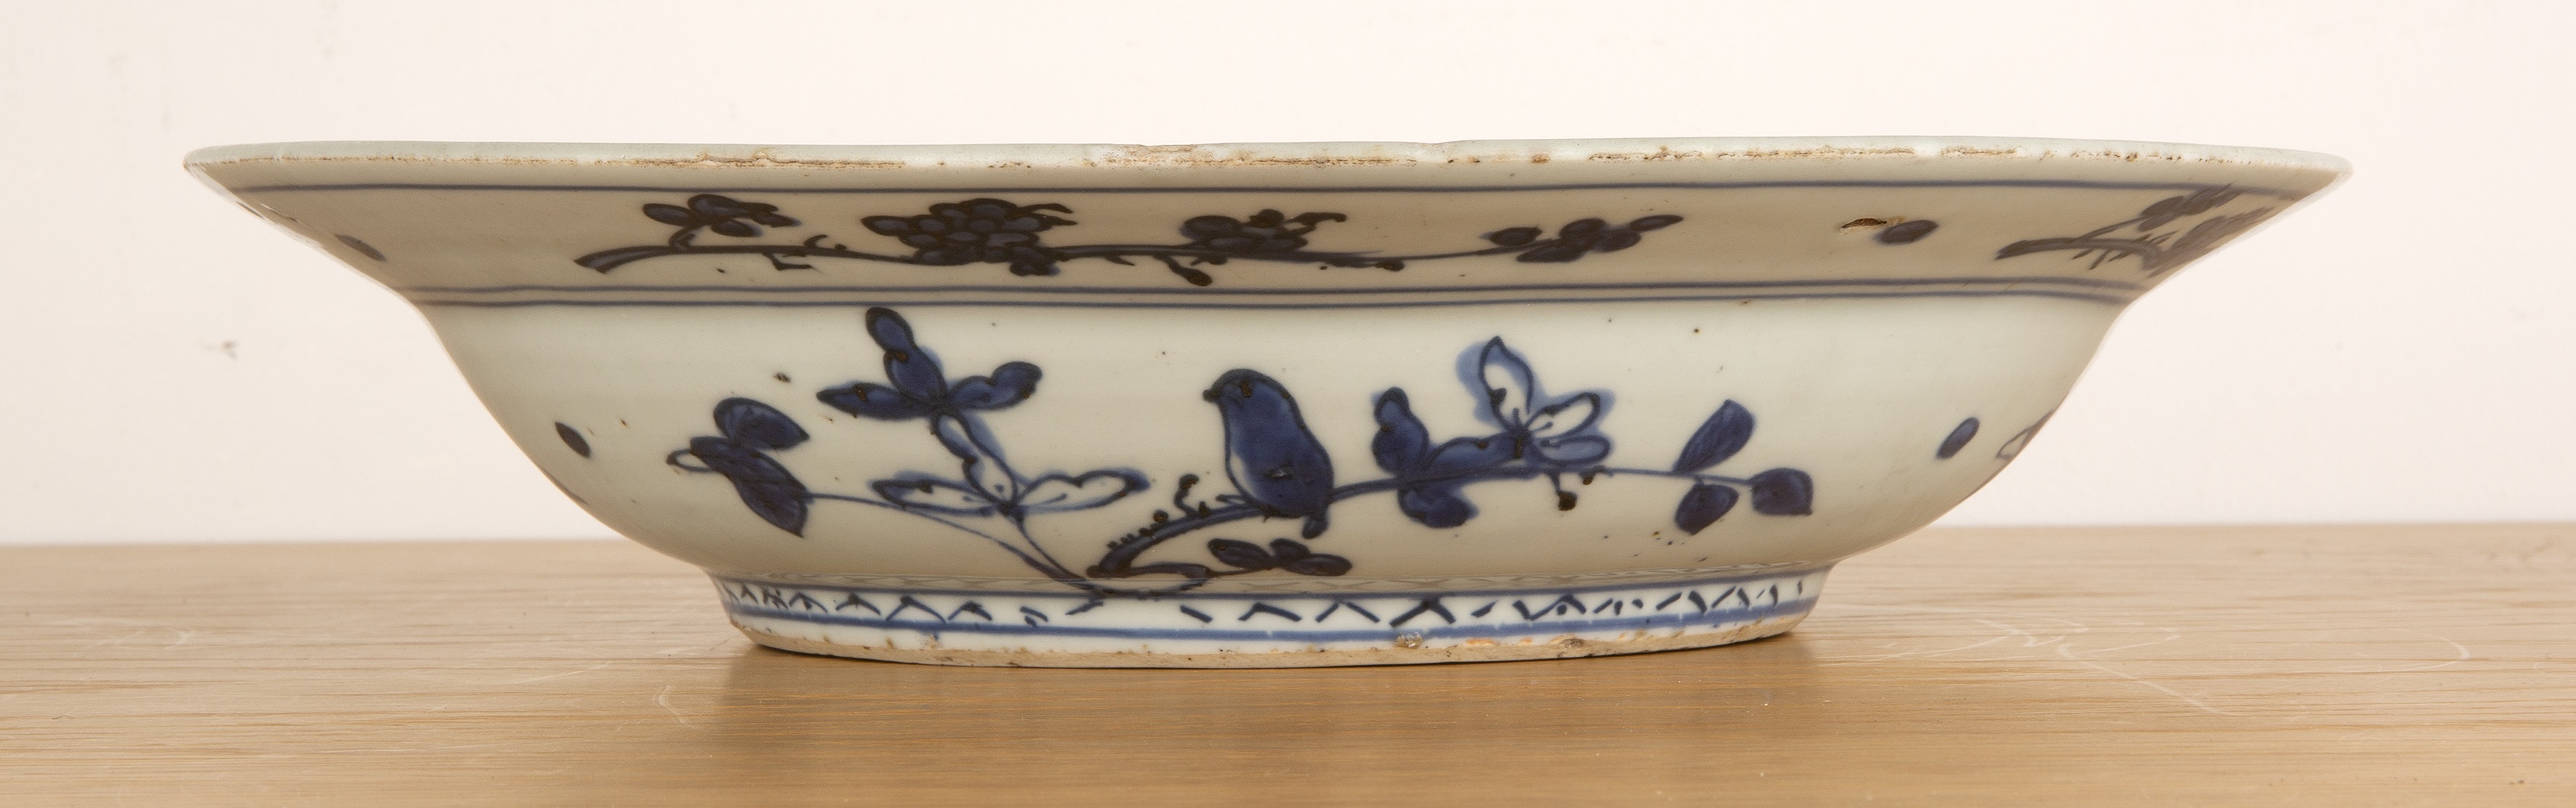 Blue and white porcelain large dish Chinese, Ming Wanli period painted with a central panel of - Image 2 of 4